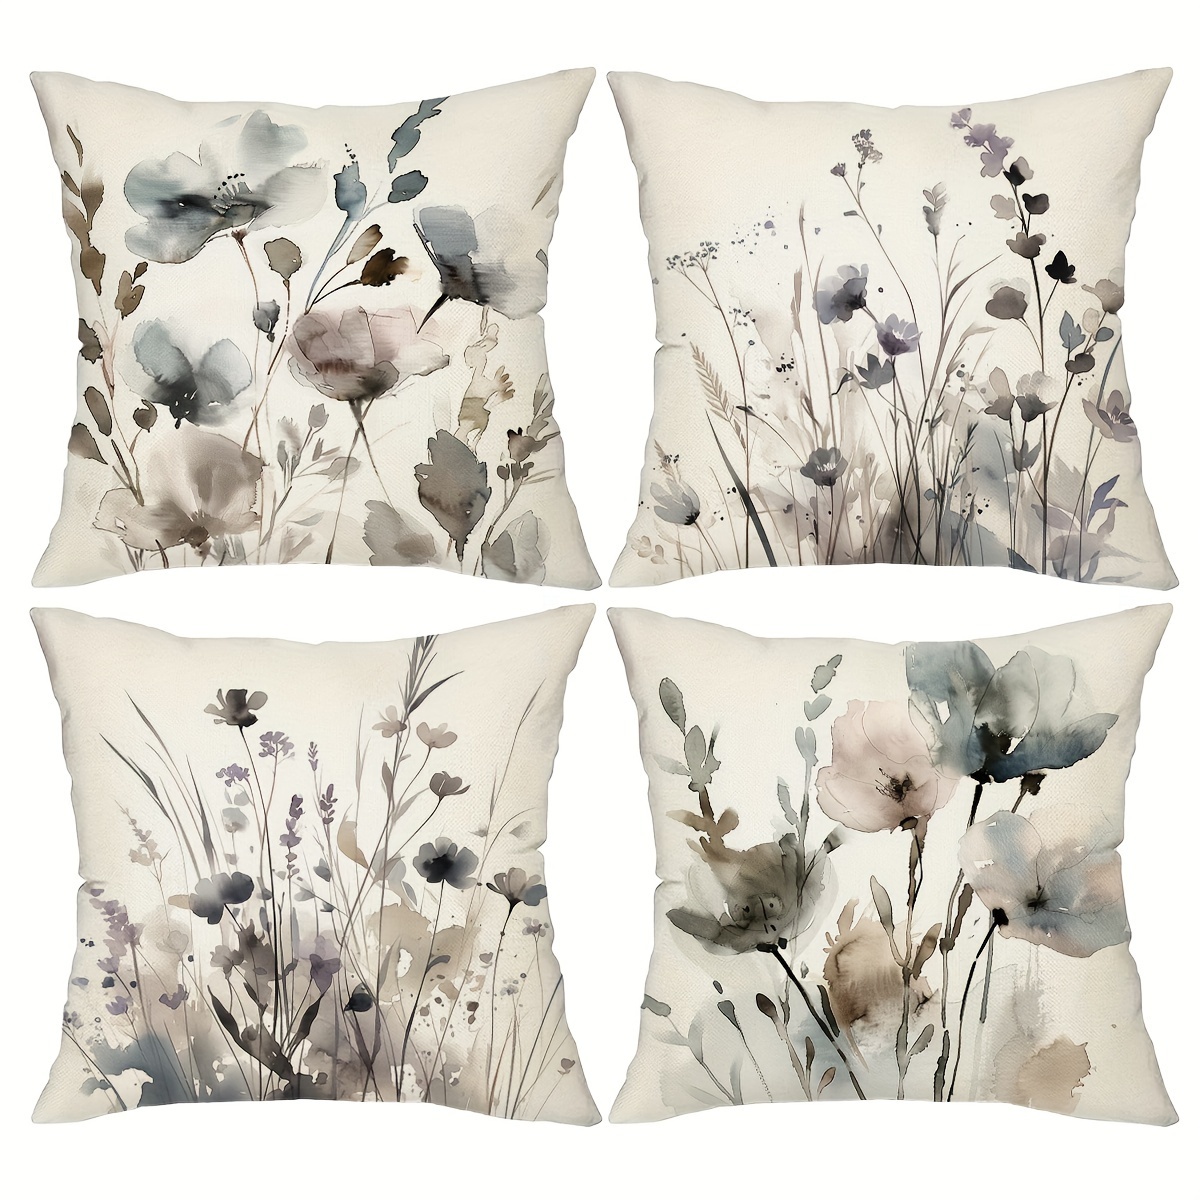 

4pcs, Watercolor Flowers Throw Pillow Covers, 18in*18in, Soft Green And Blue Tones Plants Decoratifile Cushion Covers, Home Decor For Sofa Bedroom Office Car Farmhouse, Without Pillow Cores.